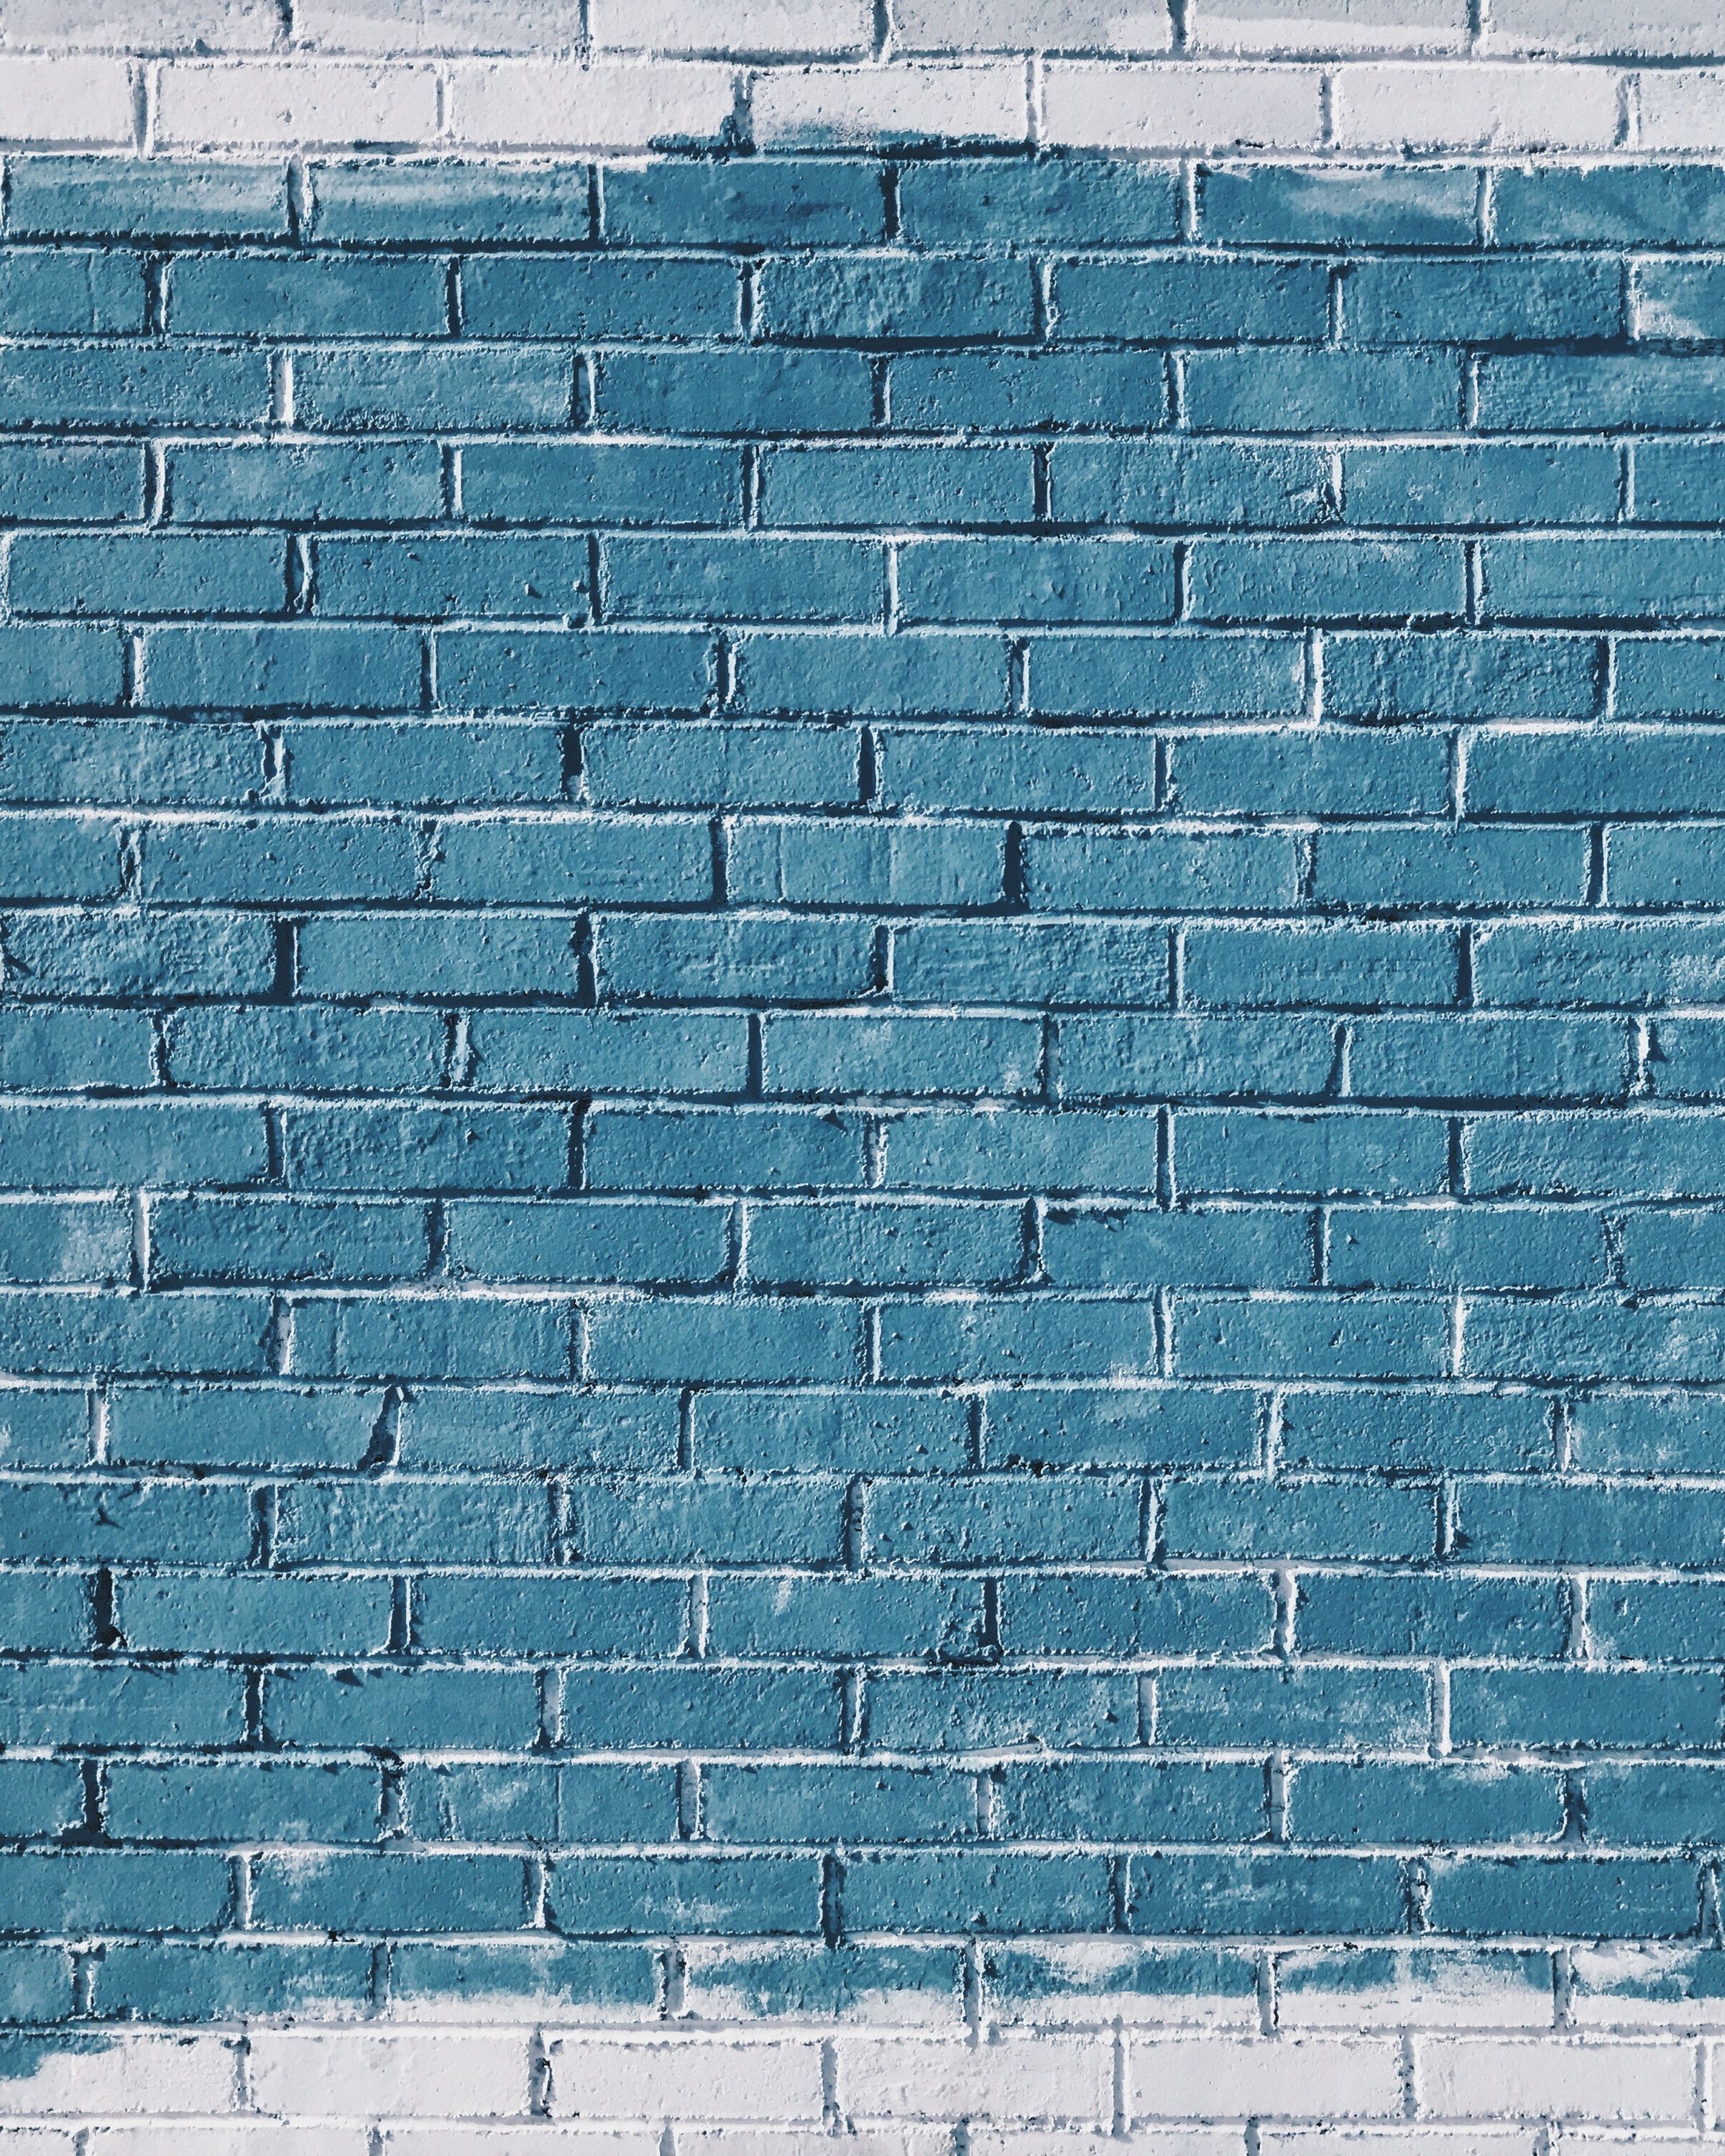 Illustrations #brick #color #colour #wall #brickwall #wallpaper HD 4k background for android :). Wall wallpaper, 480x800 wallpaper, Brick wallpaper iphone